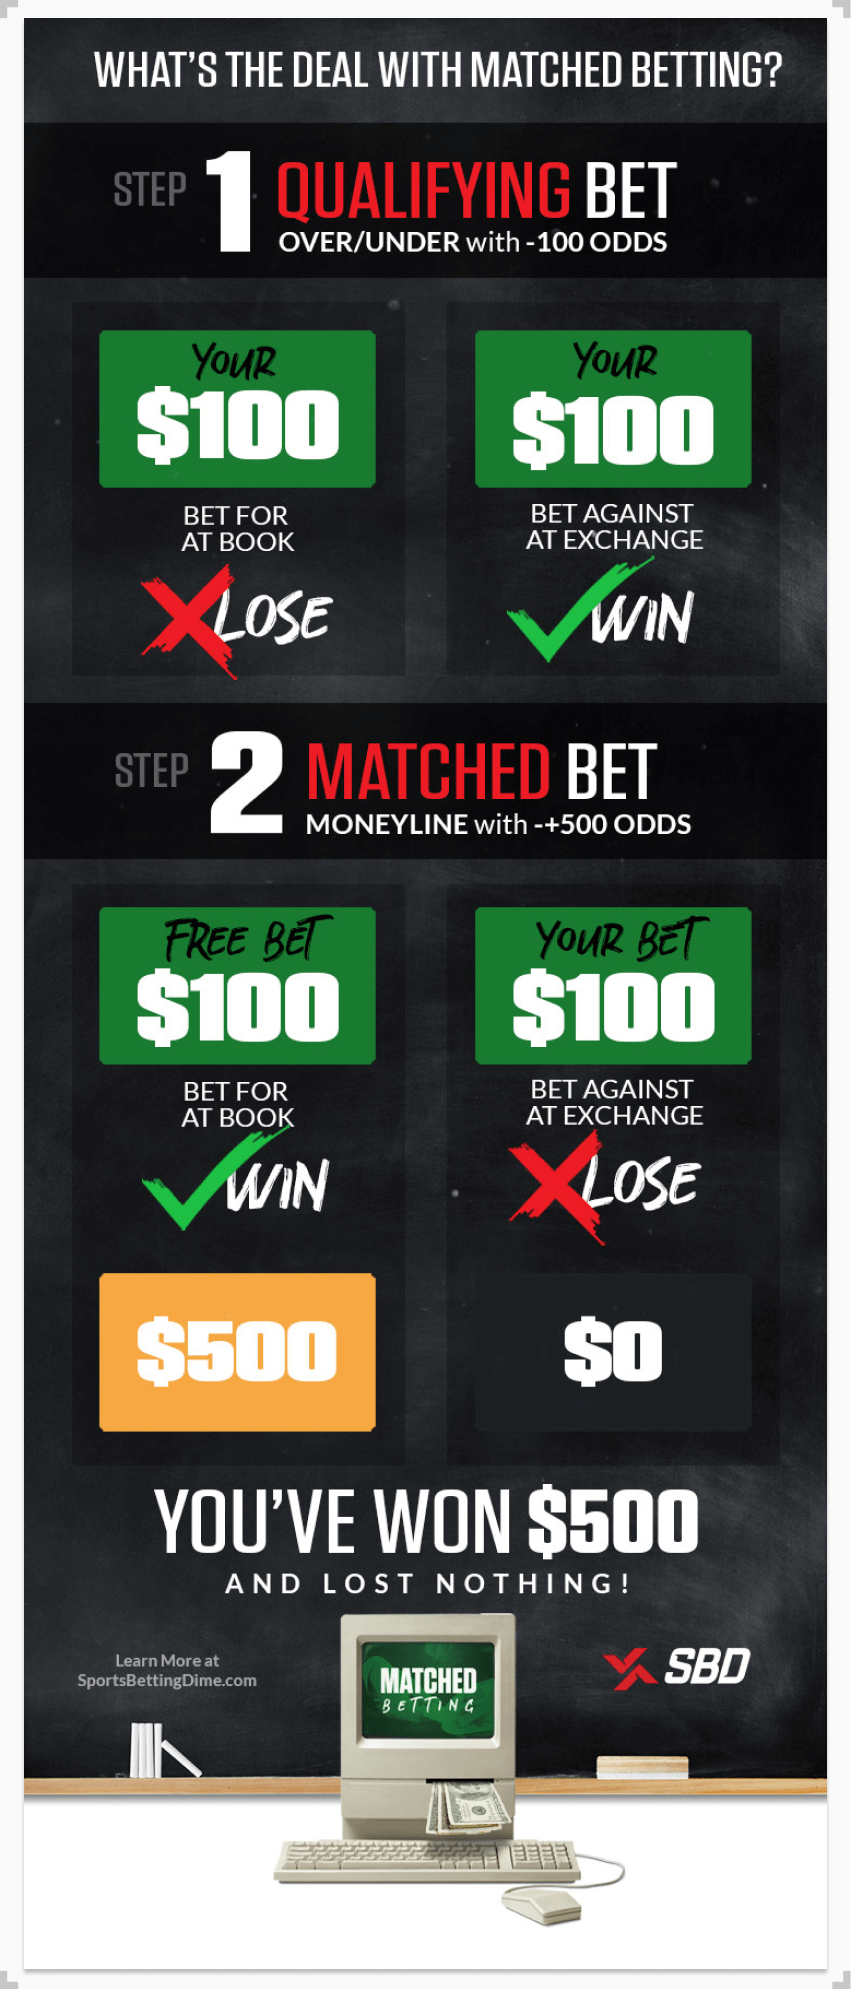 infographic illustrating how matched betting works with a bet of 100 dollars